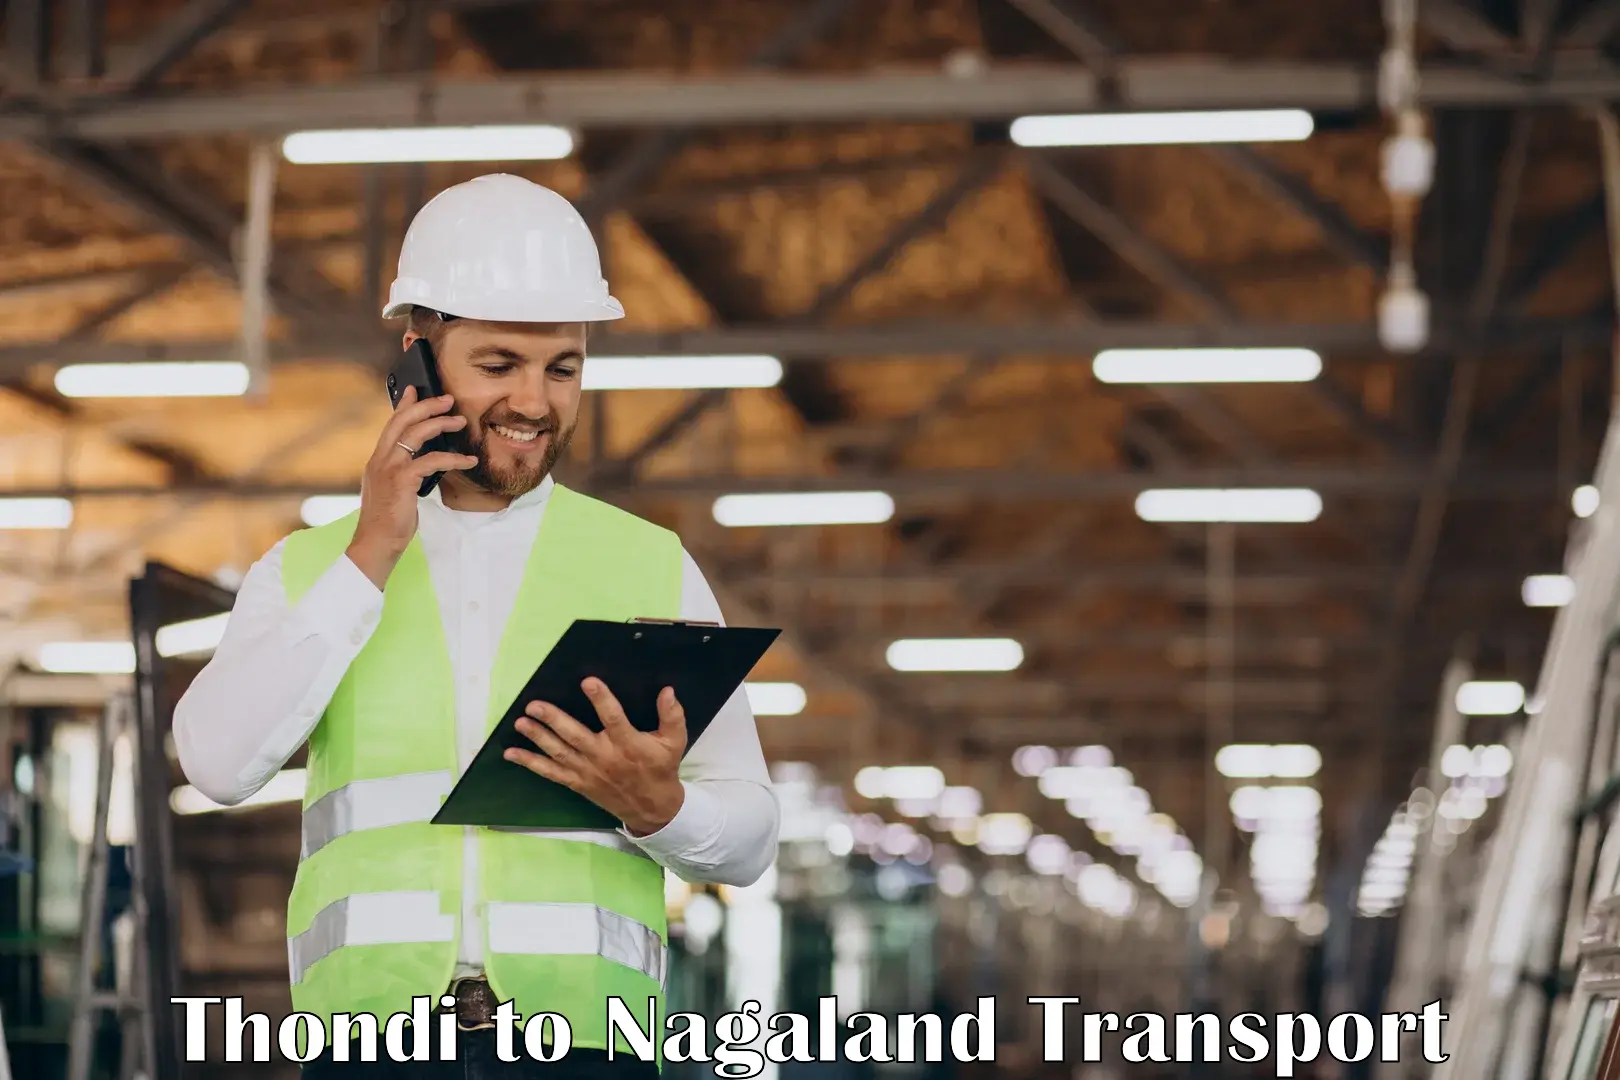 Part load transport service in India Thondi to Nagaland